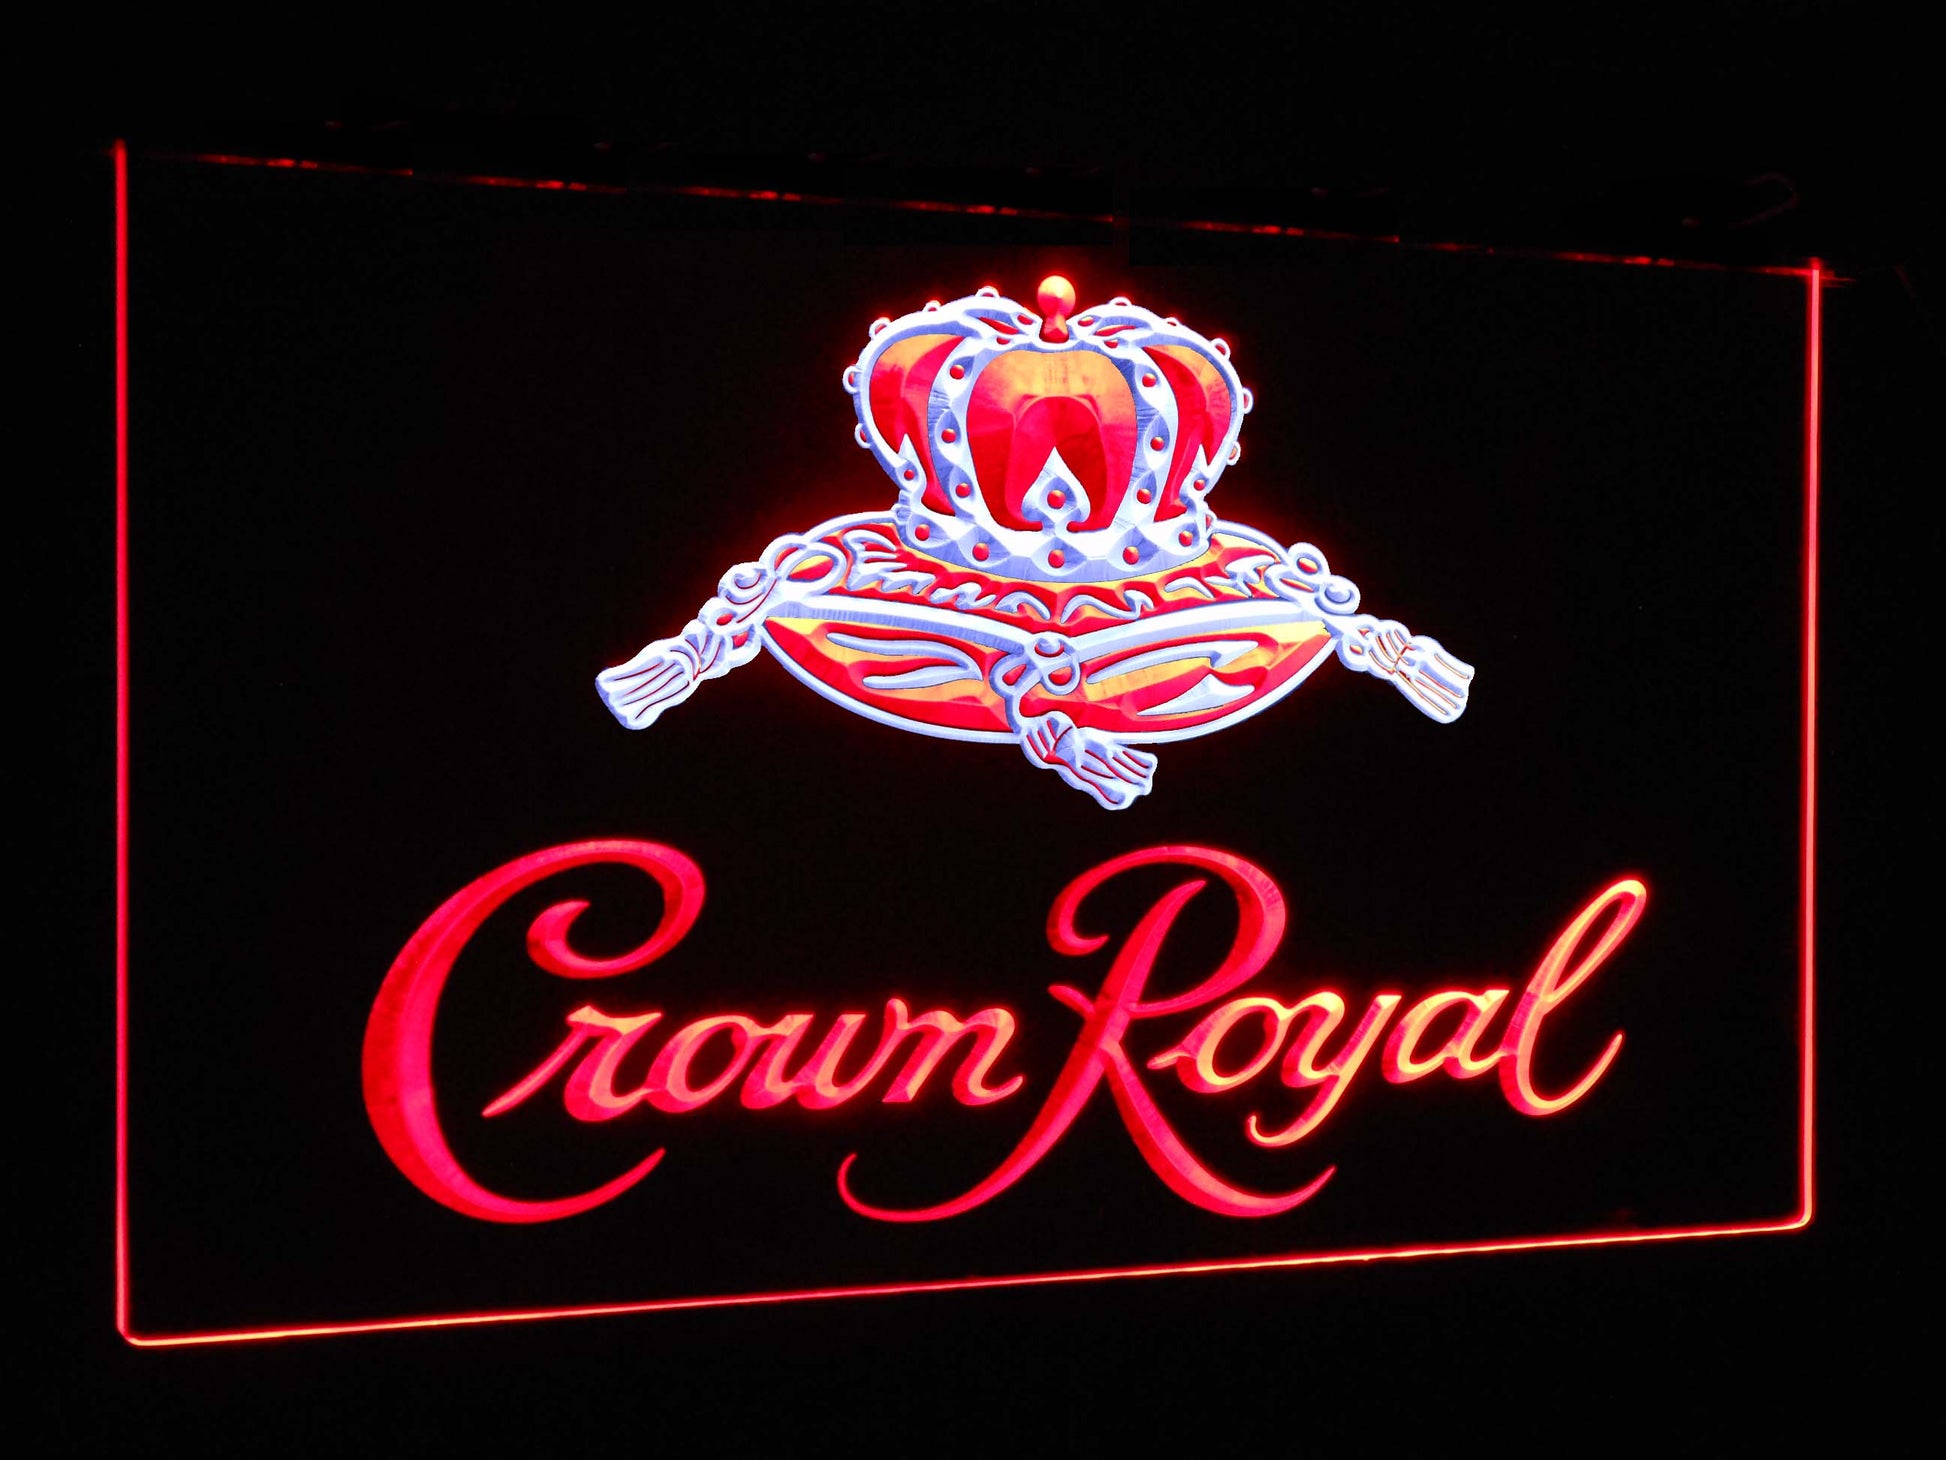 Crown Royal  Bar Decoration Gift Dual Color Led Neon Light Signs st6-a0104 by Woody Signs Co. - Handmade Crafted Unique Wooden Creative